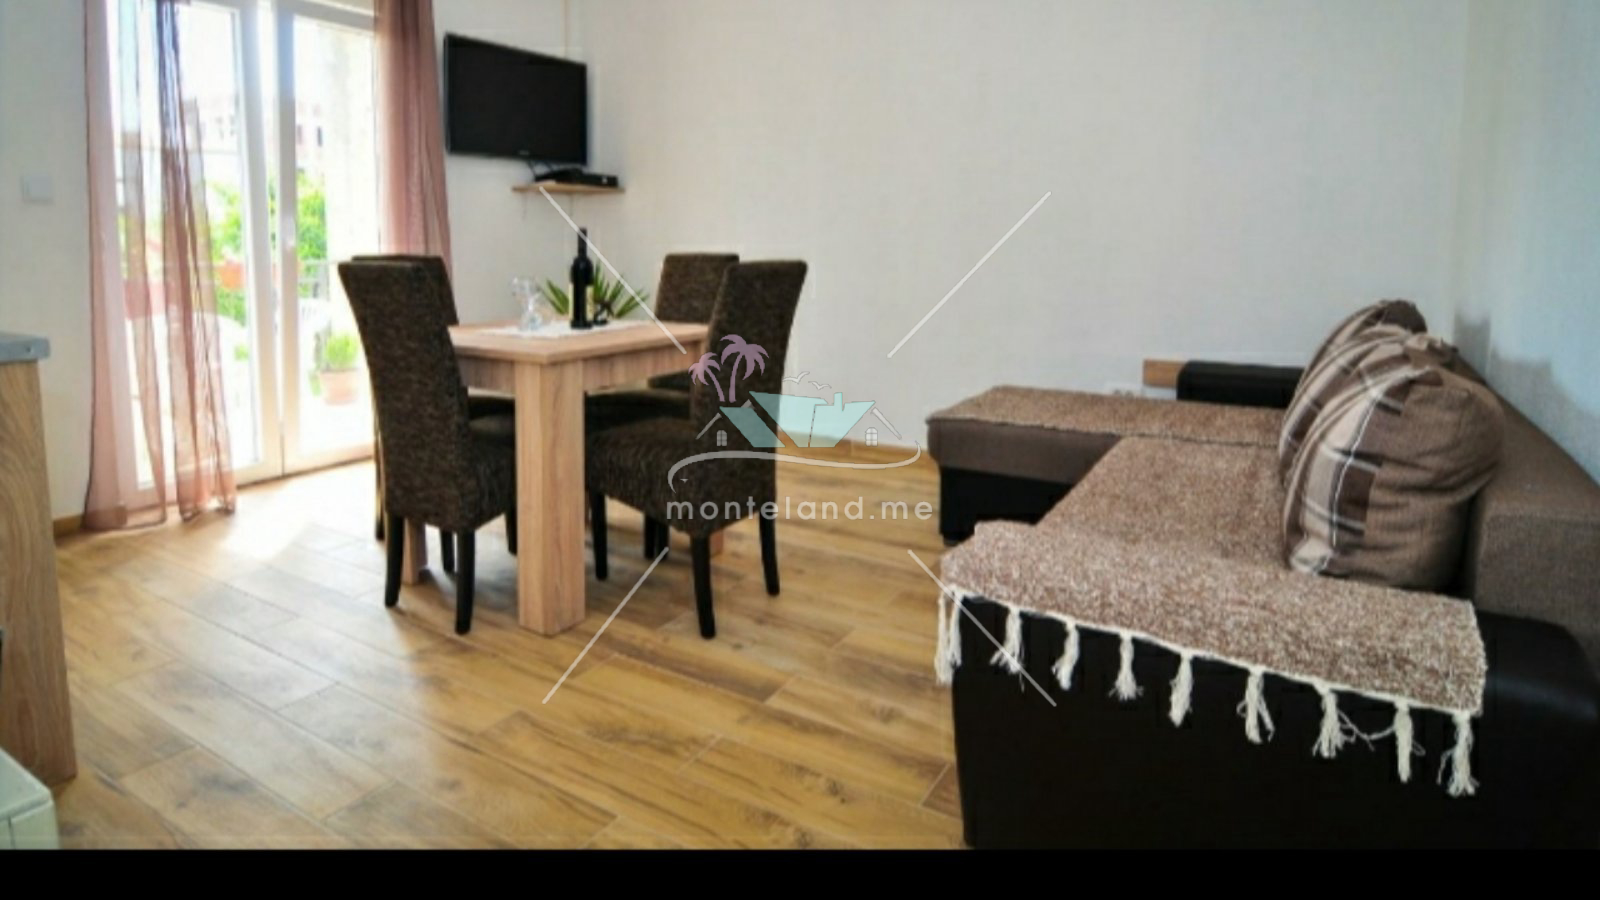 Apartment, offers vacation, TIVAT, TIVAT, Montenegro, 48M, Price - 400€